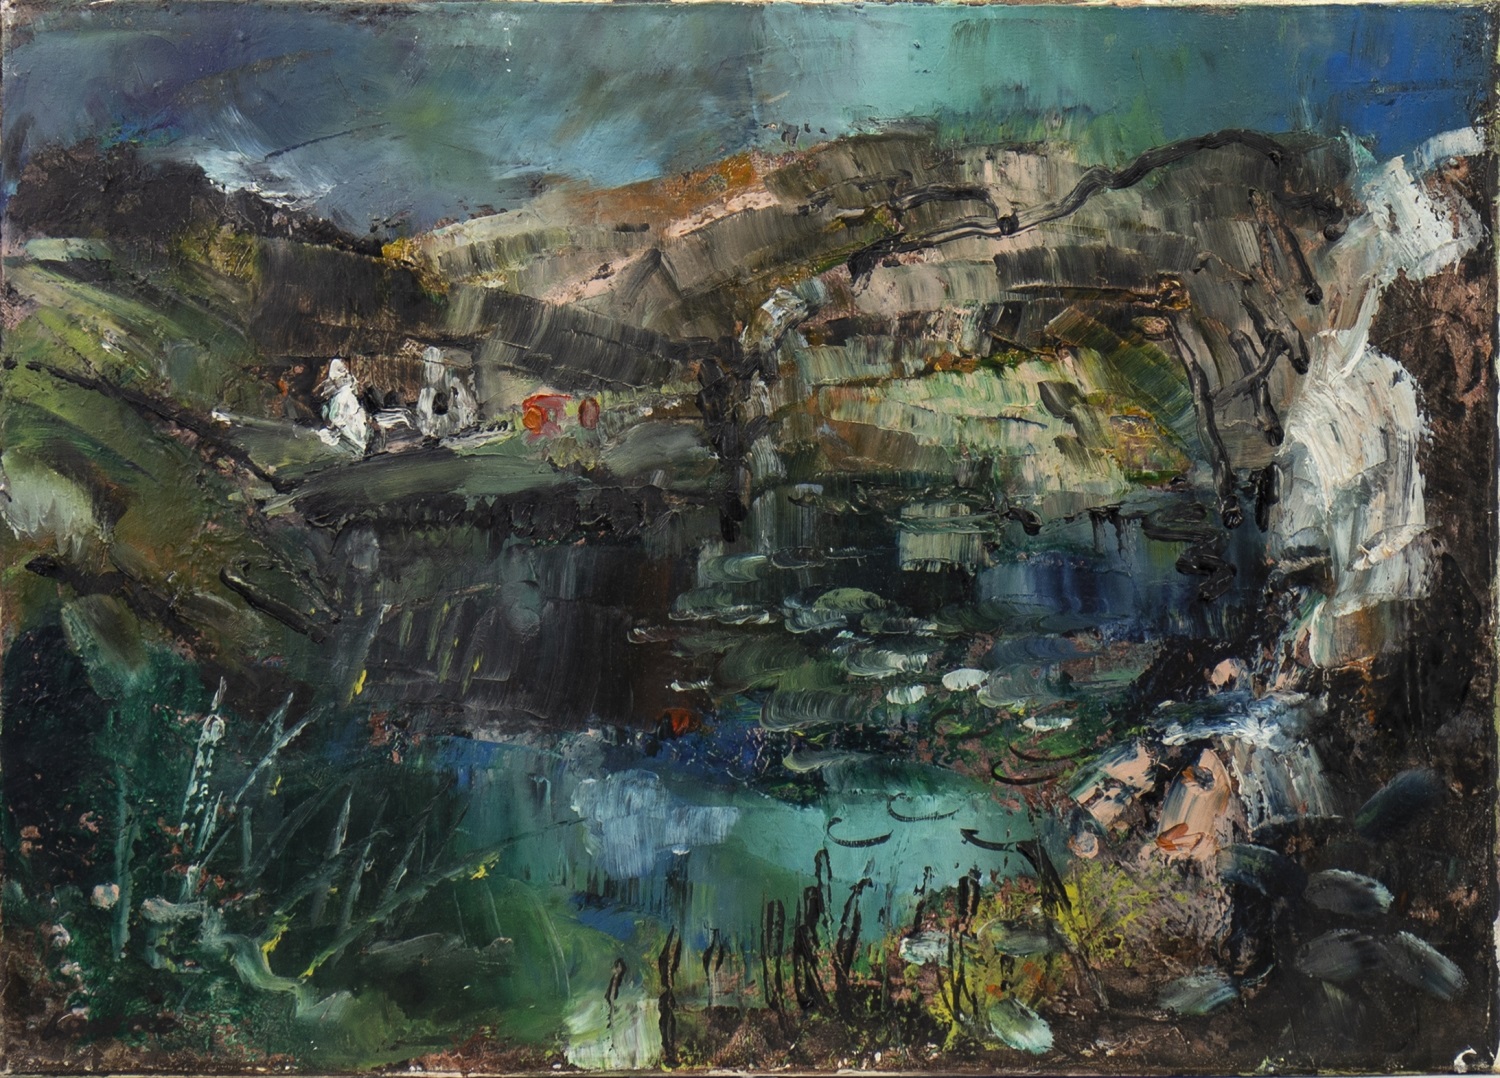 HIGHLANDS LANDSCAPE WITH LOCH AND COTTAGE, AN OIL BY HAMISH LAWRIE - Image 2 of 2